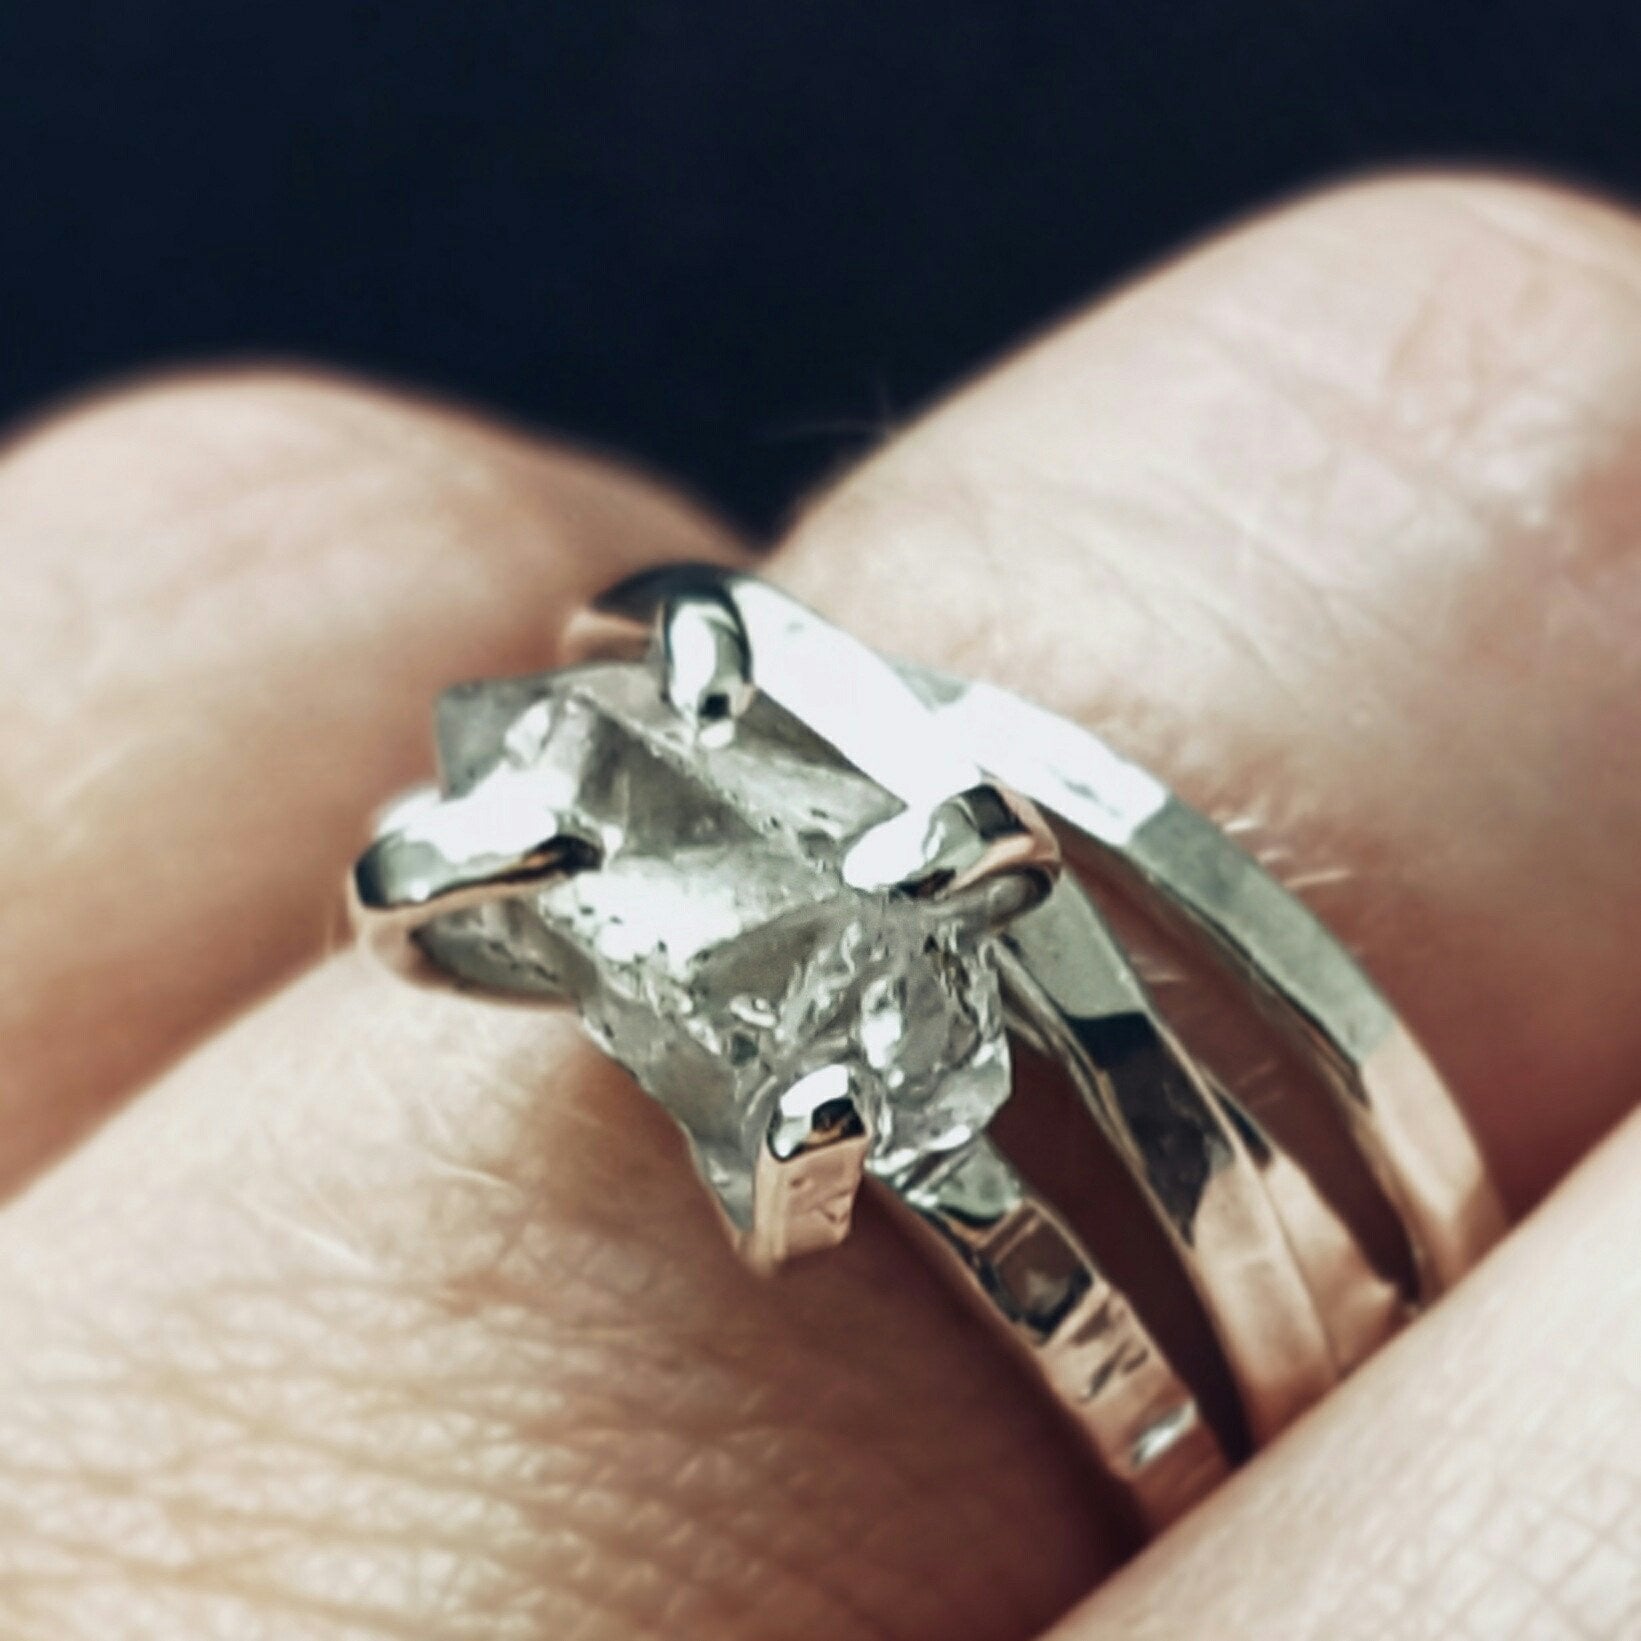 a close up of a finger wearing a set of intertwined silver bad rings and a silver claw style ring